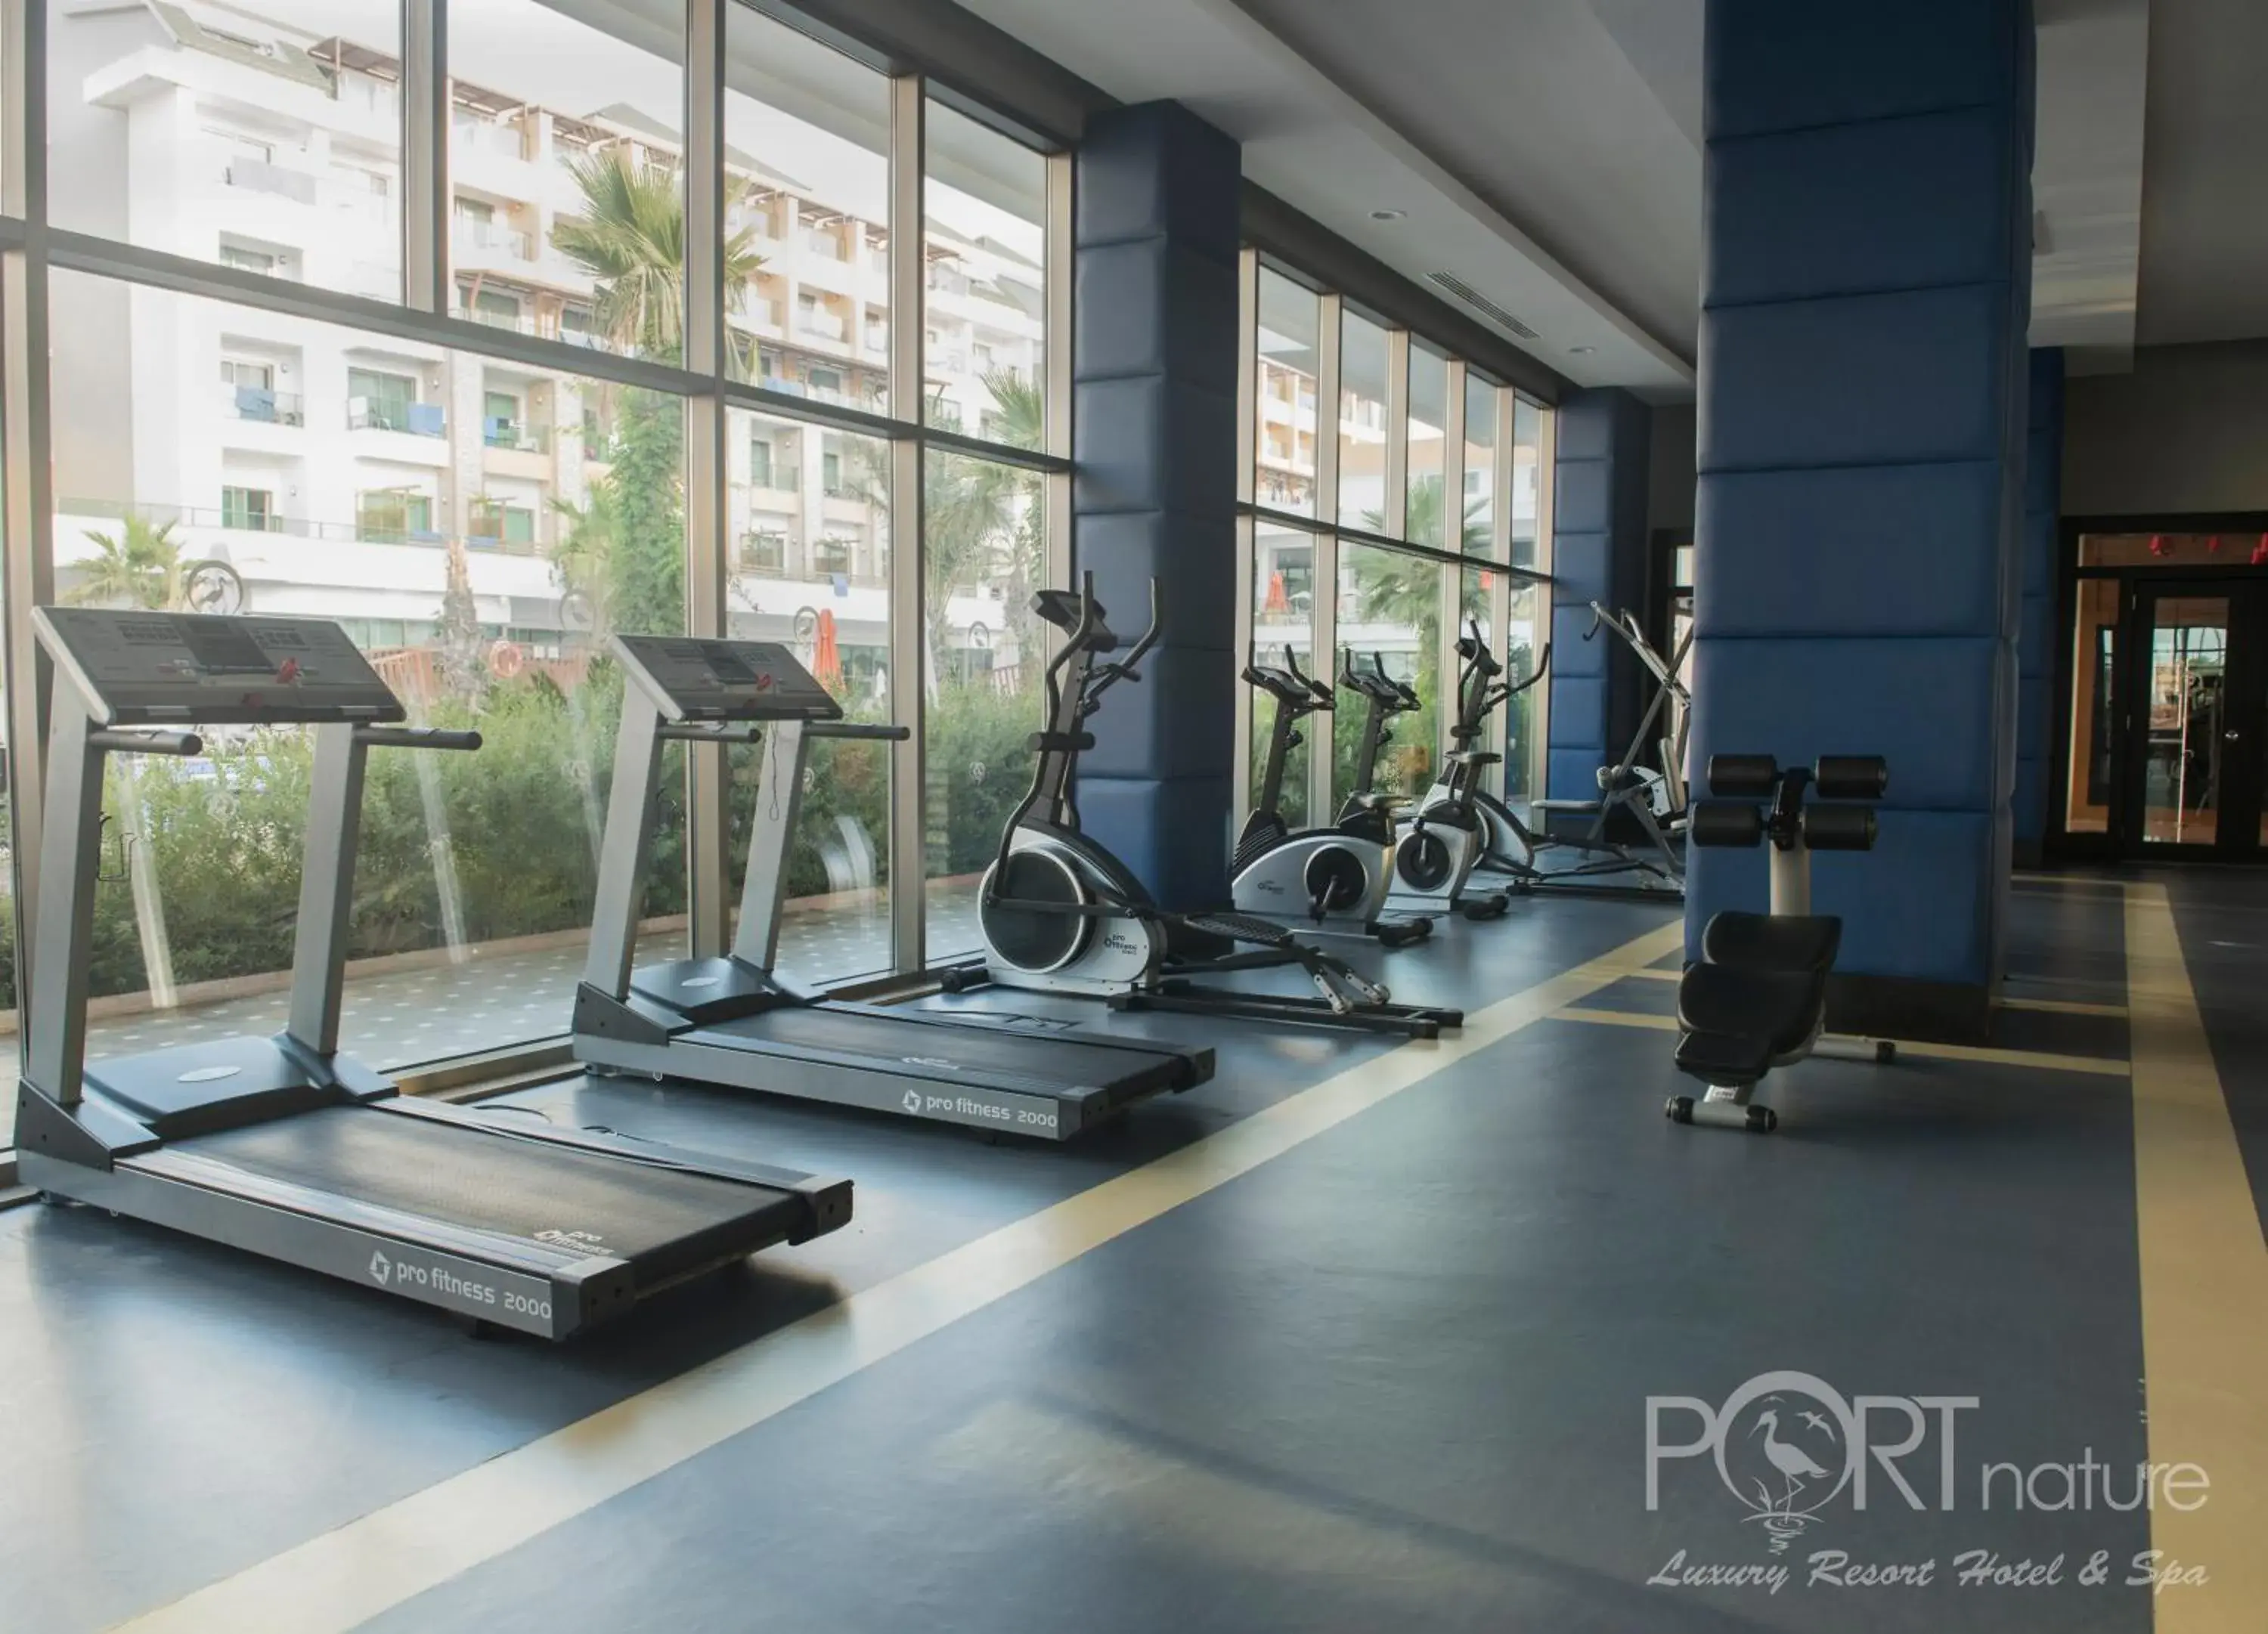 Fitness centre/facilities, Fitness Center/Facilities in Port Nature Luxury Resort